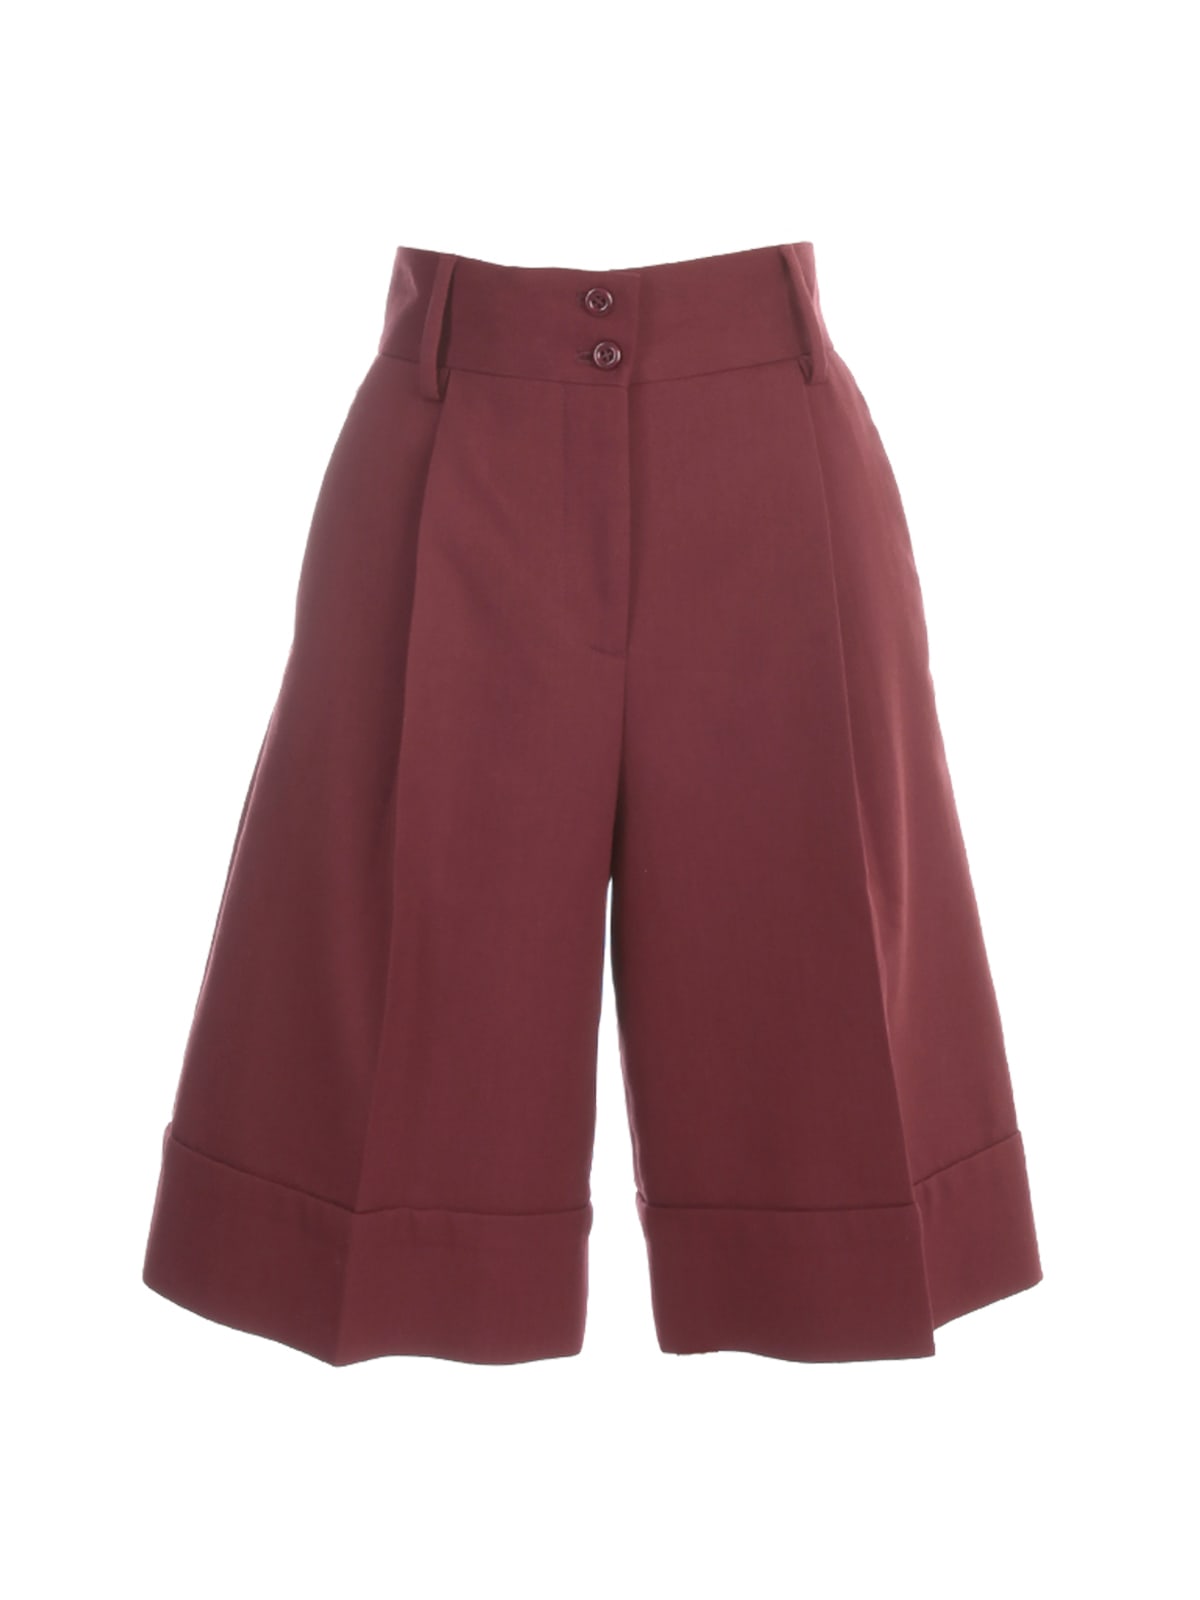 See by Chloé Knee Lenght Shorts